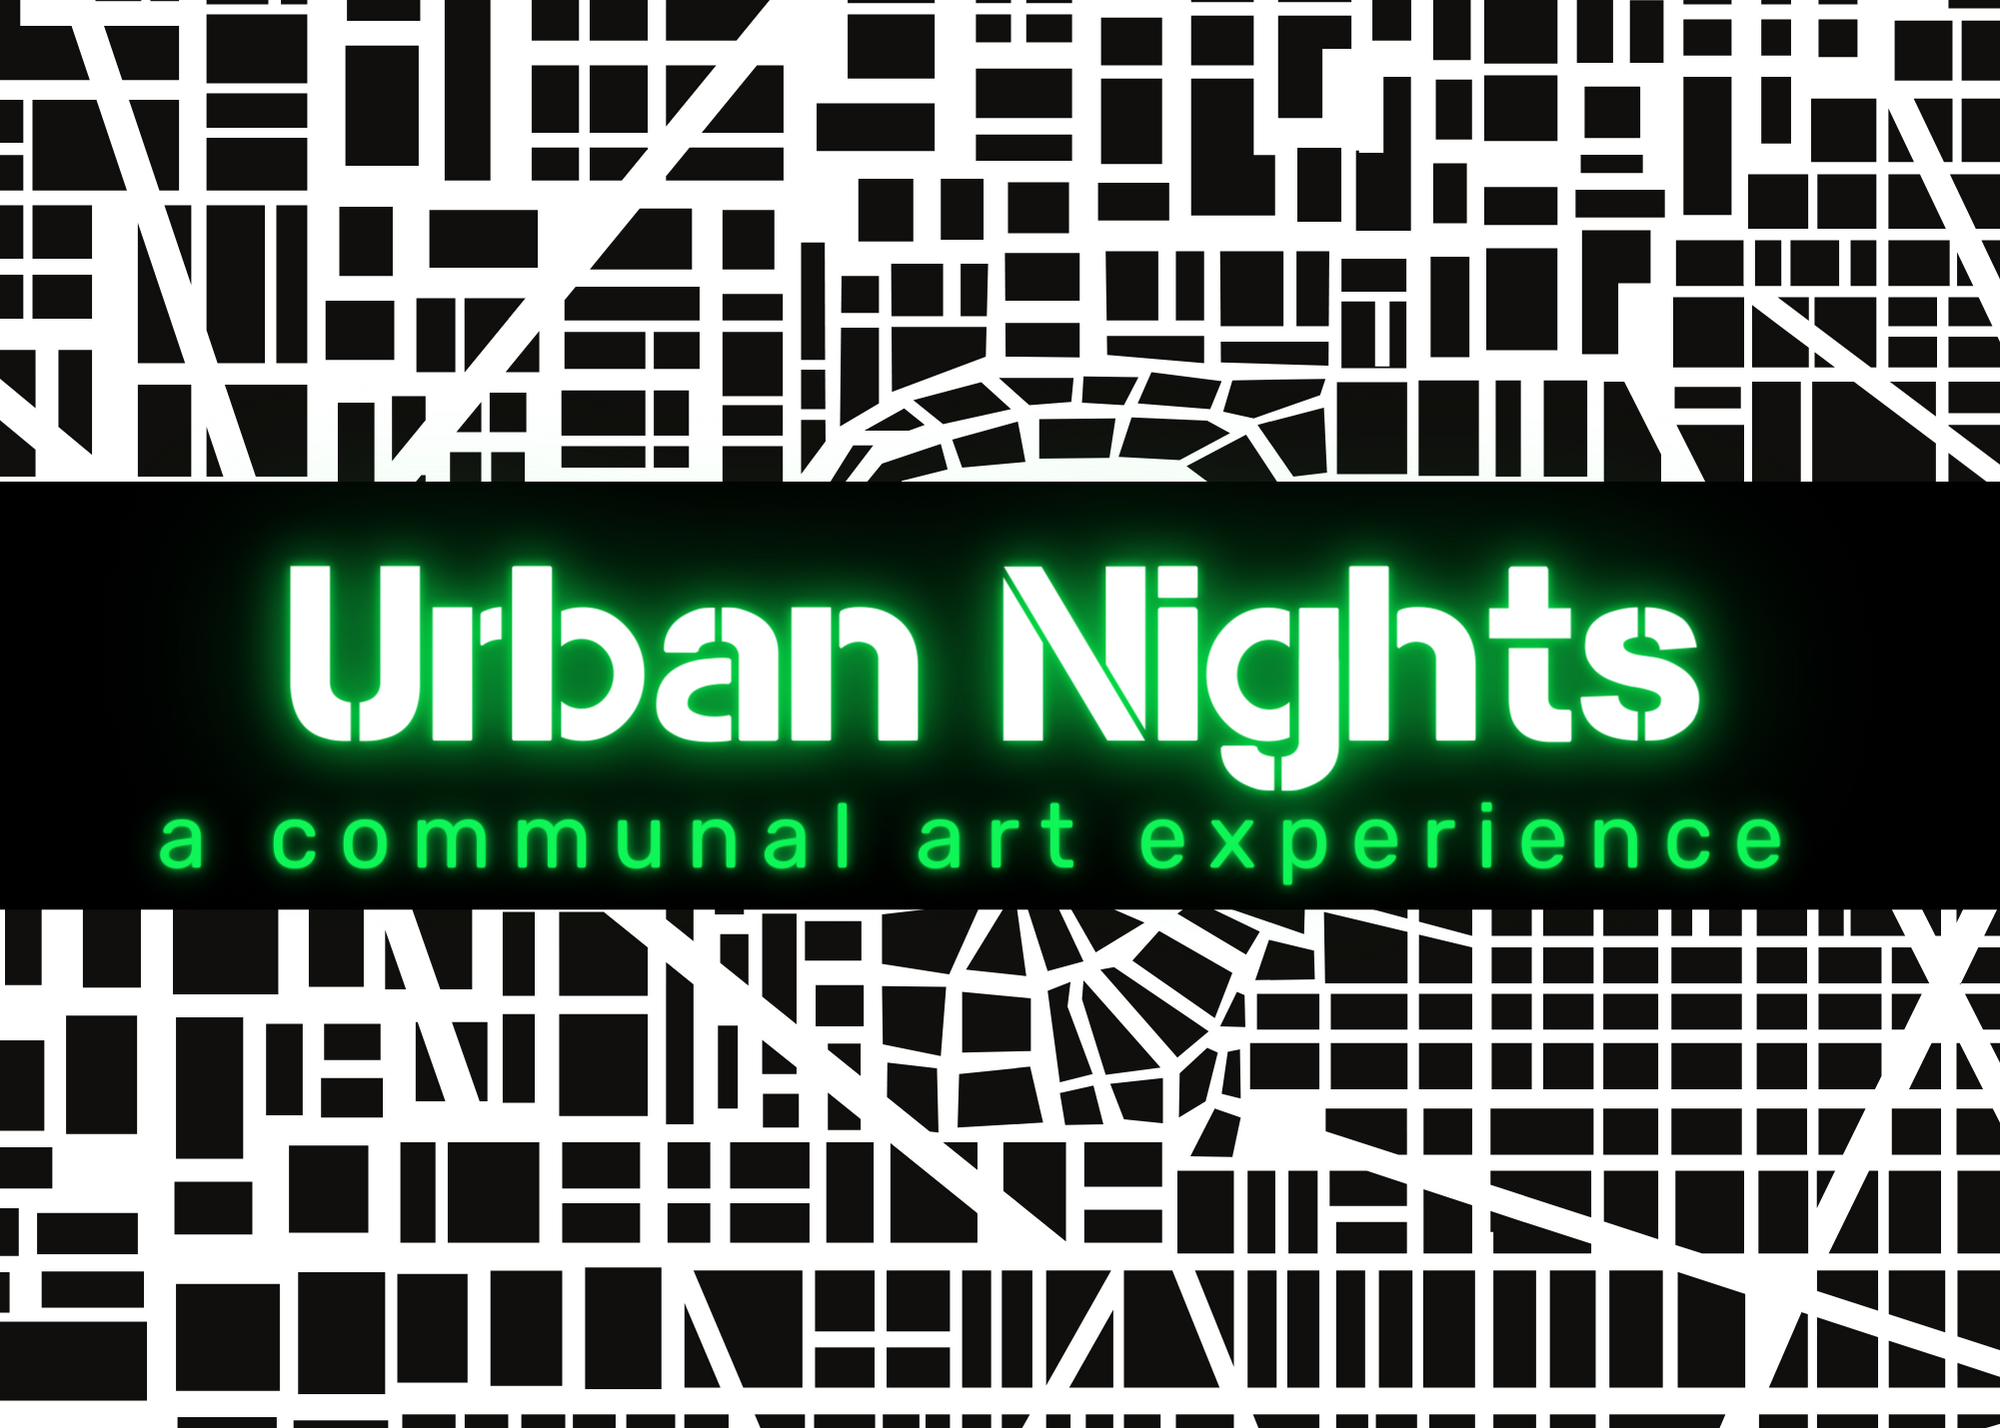 Promotional Image for Urban Nights with graphic map and text.